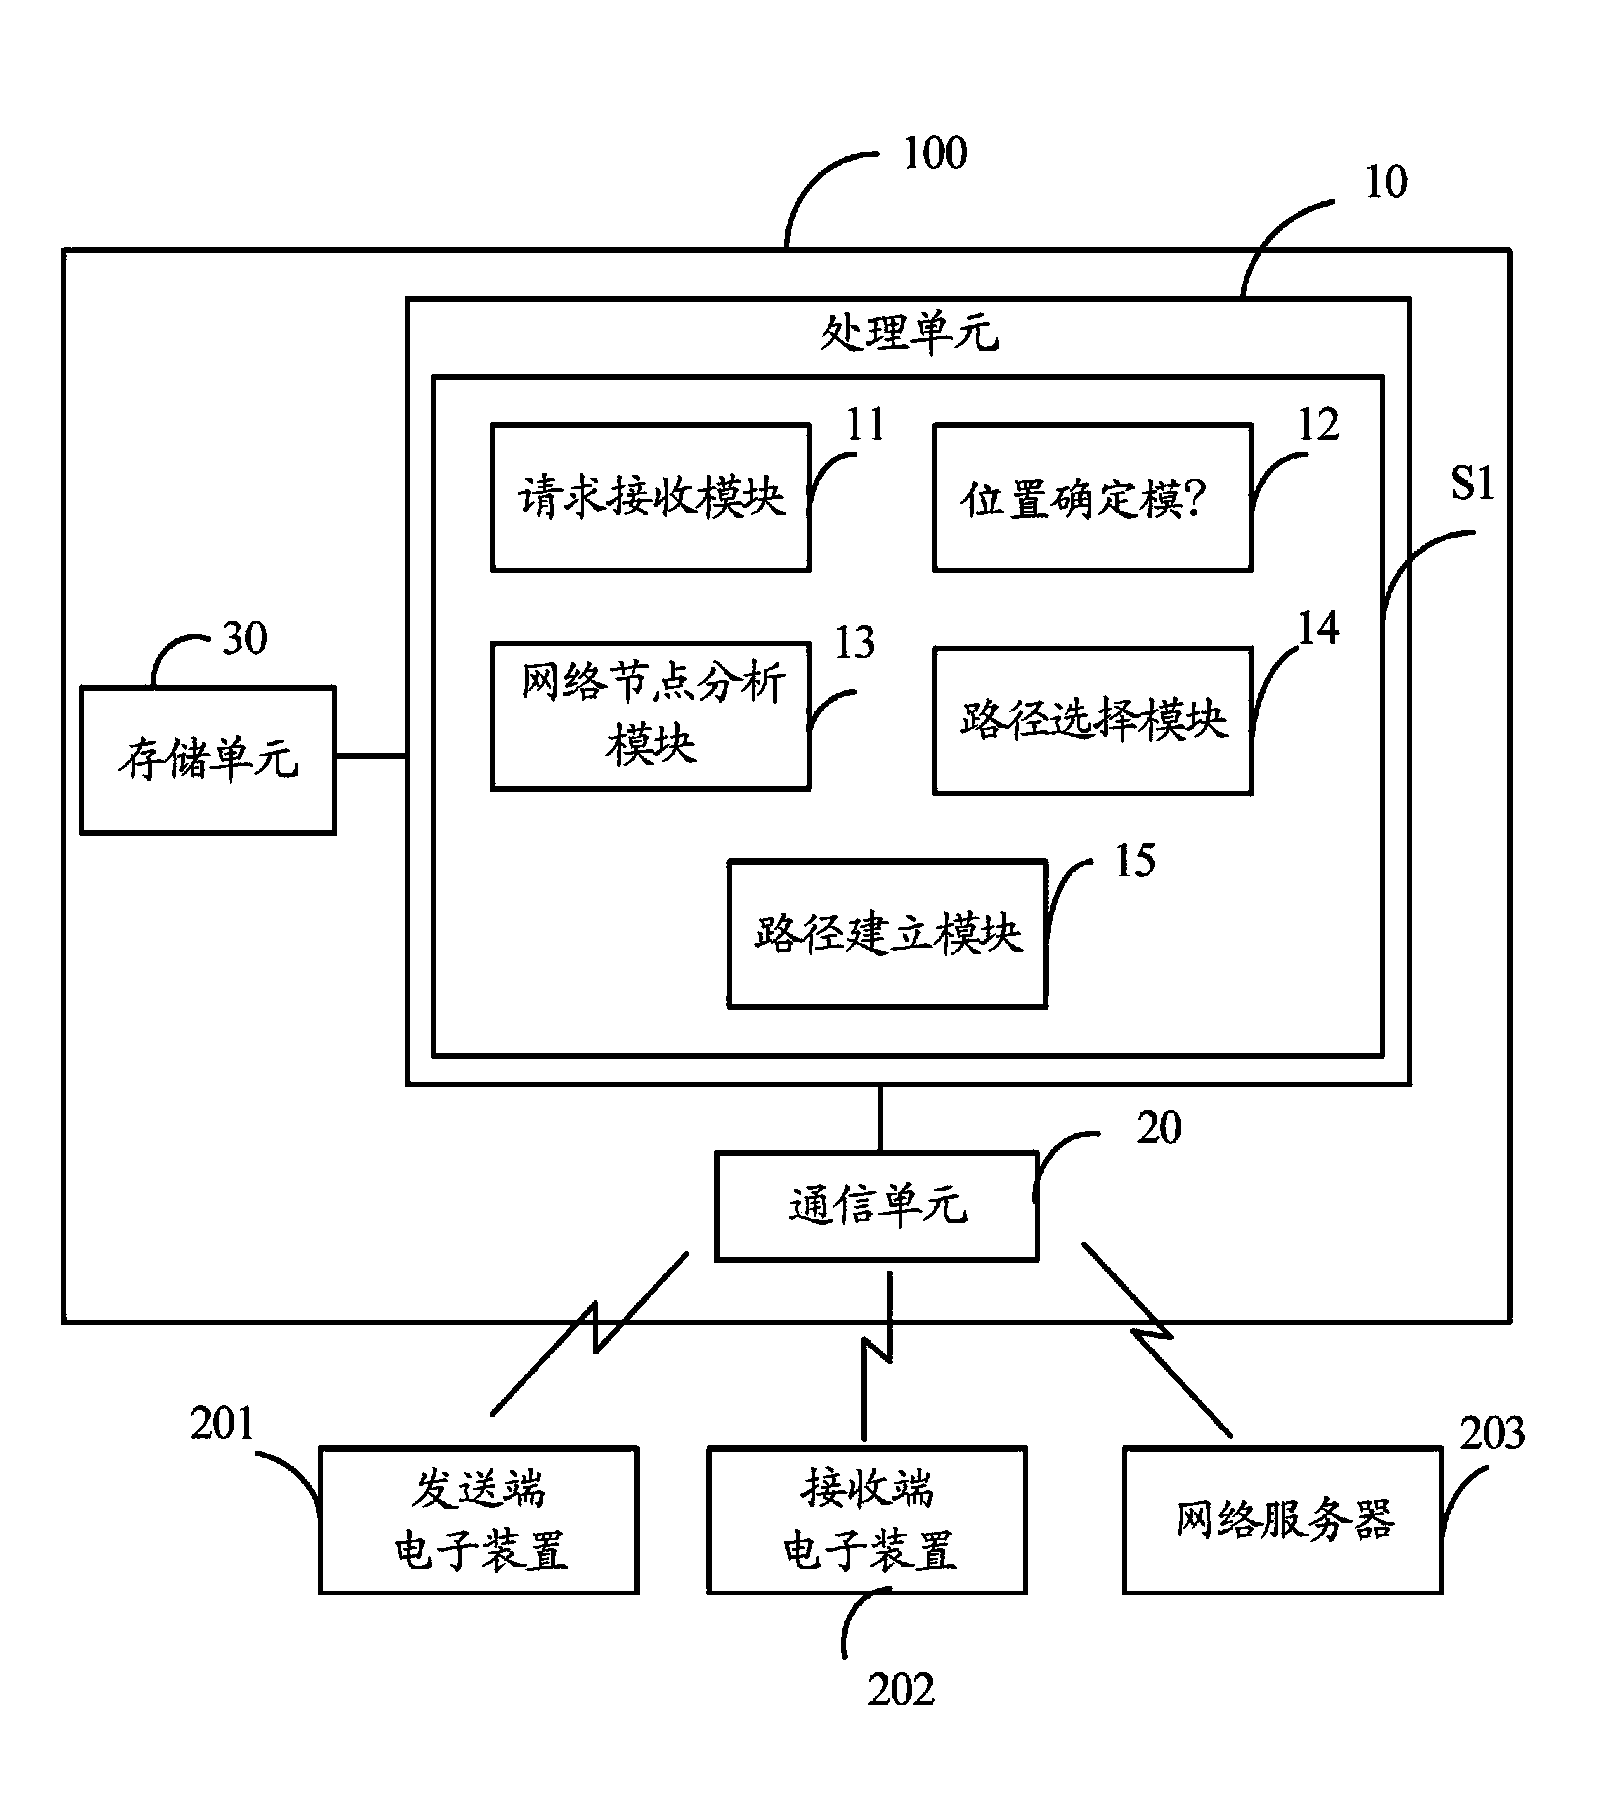 Transmission management apparatus, system and method